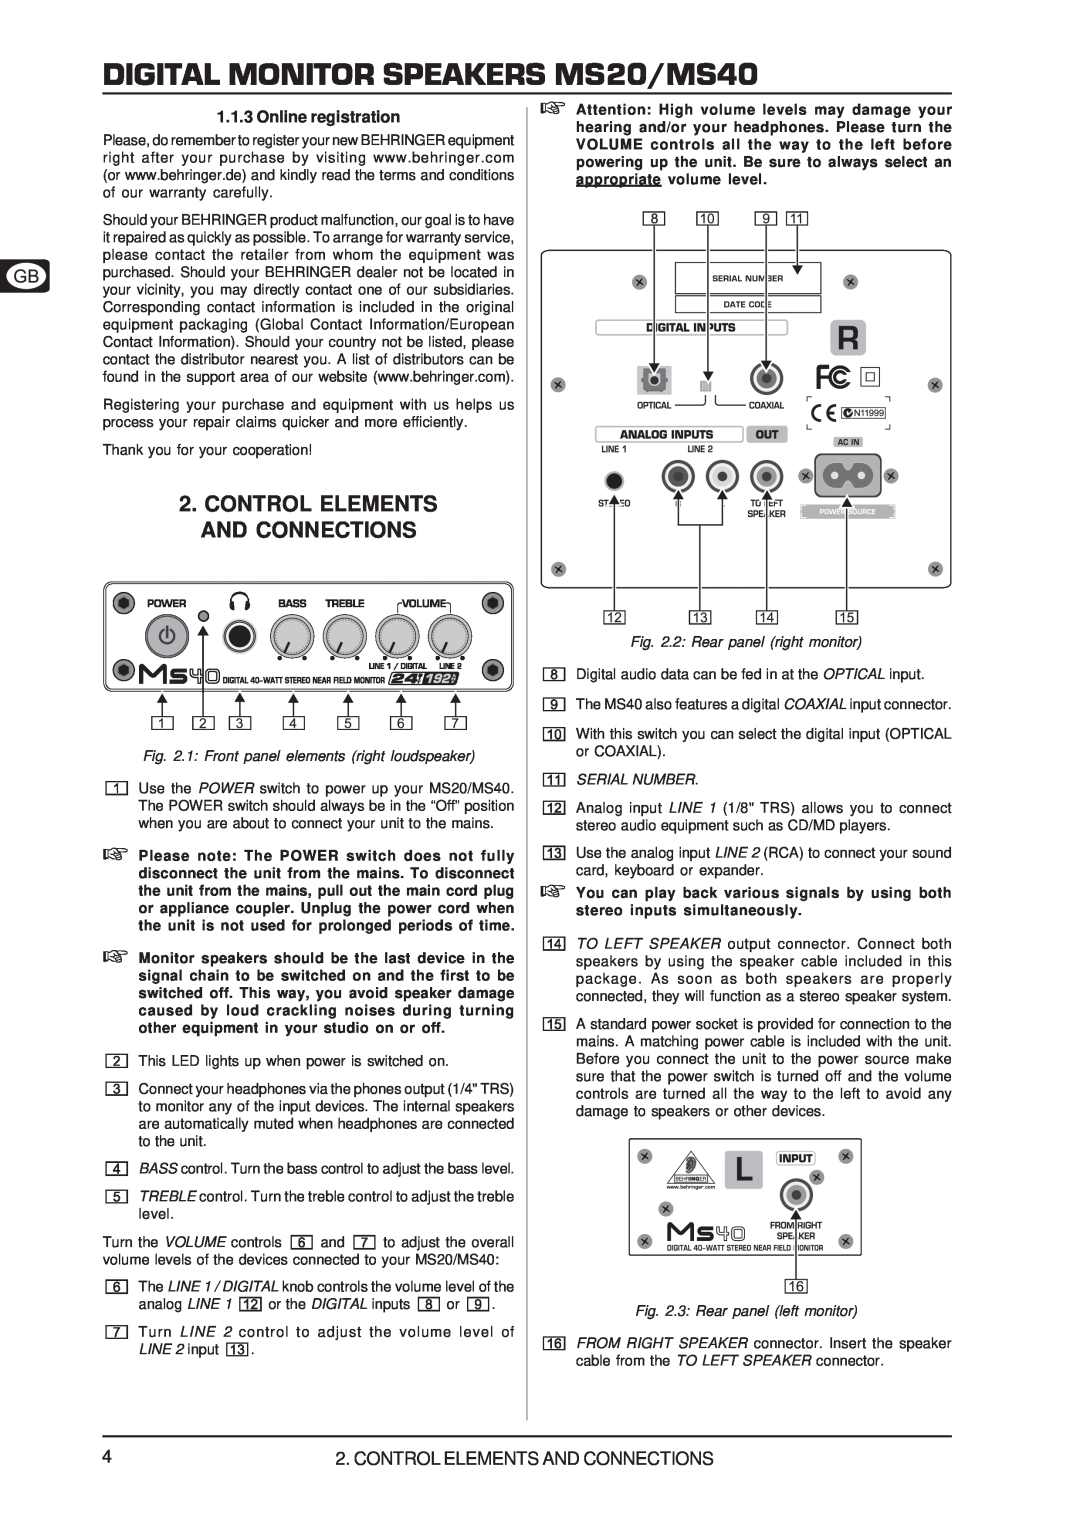 Behringer MS20 user manual Control Elements And Connections, Online registration, 1 Front panel elements right loudspeaker 